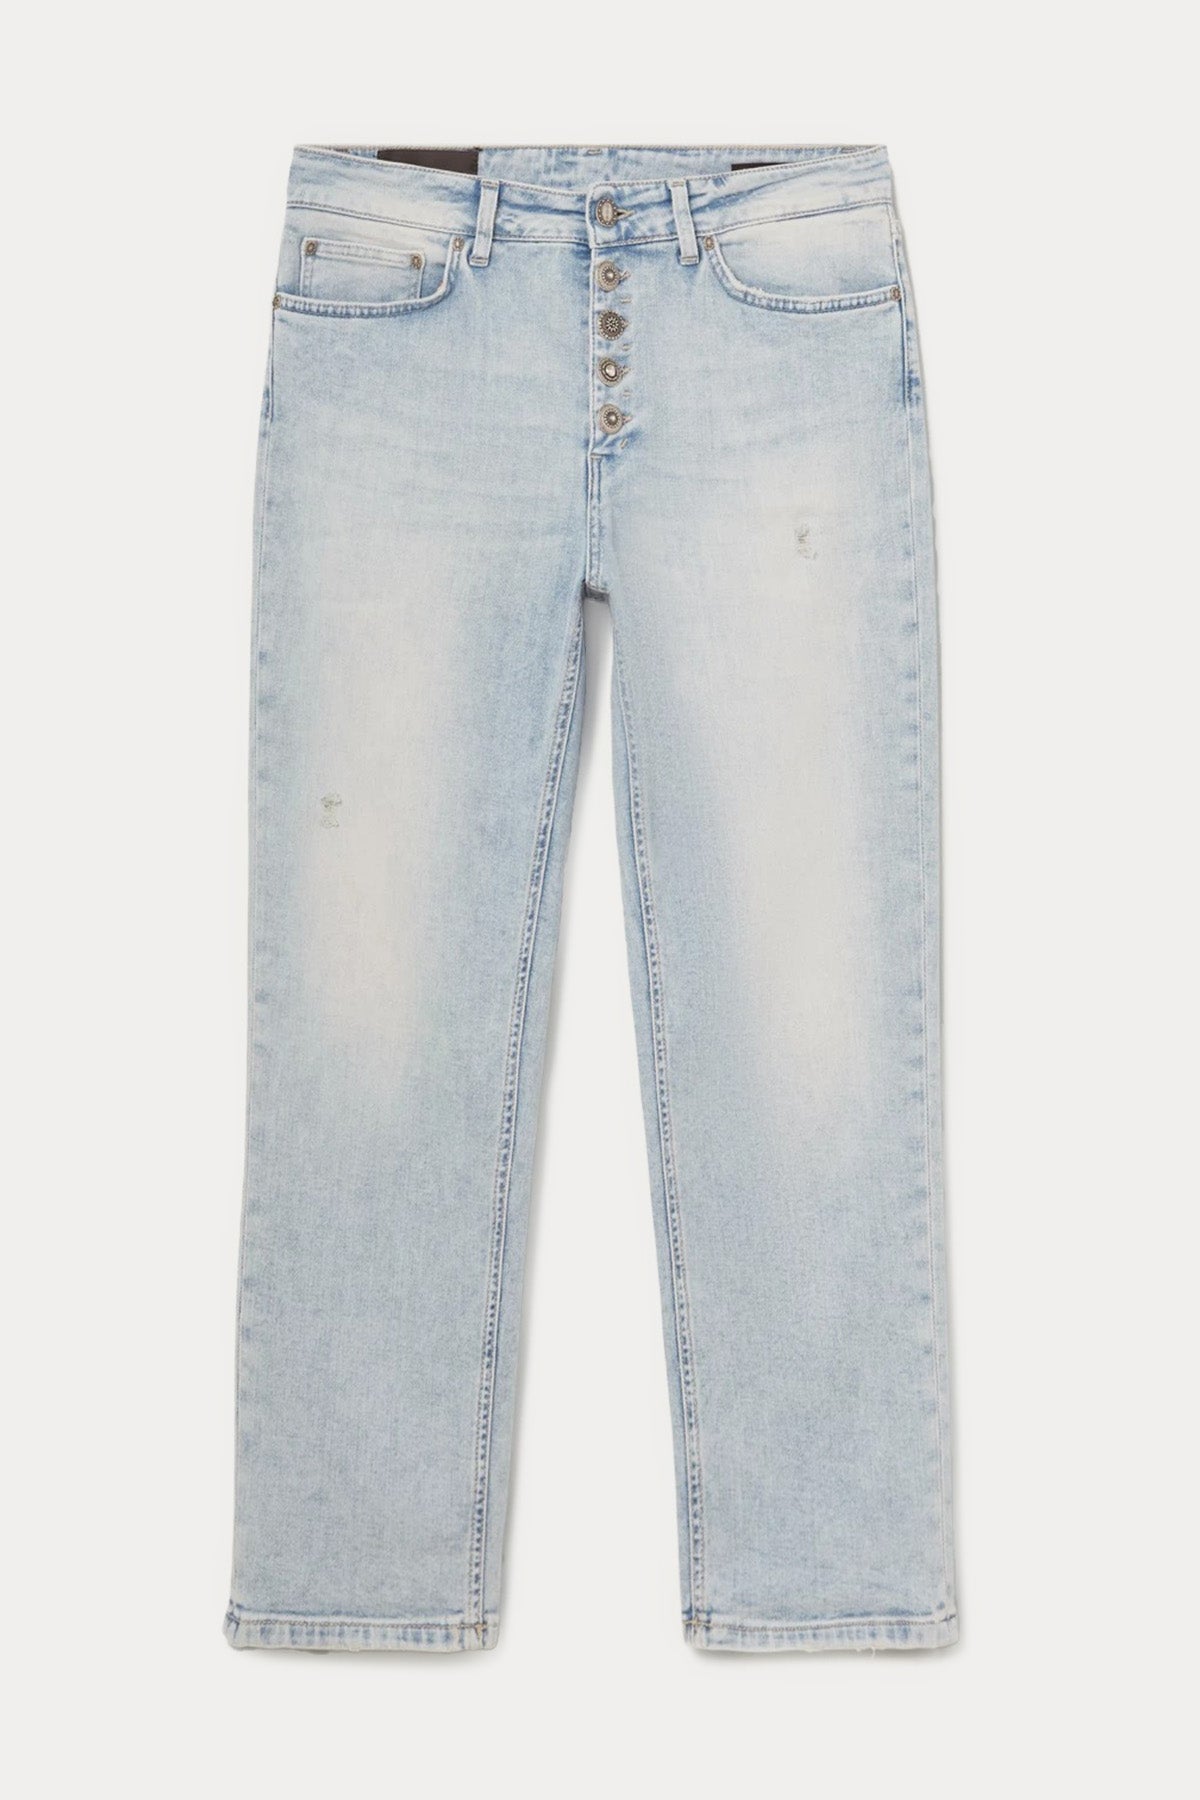 Dondup Koons Loose Fit Crop Jeans-Libas Trendy Fashion Store